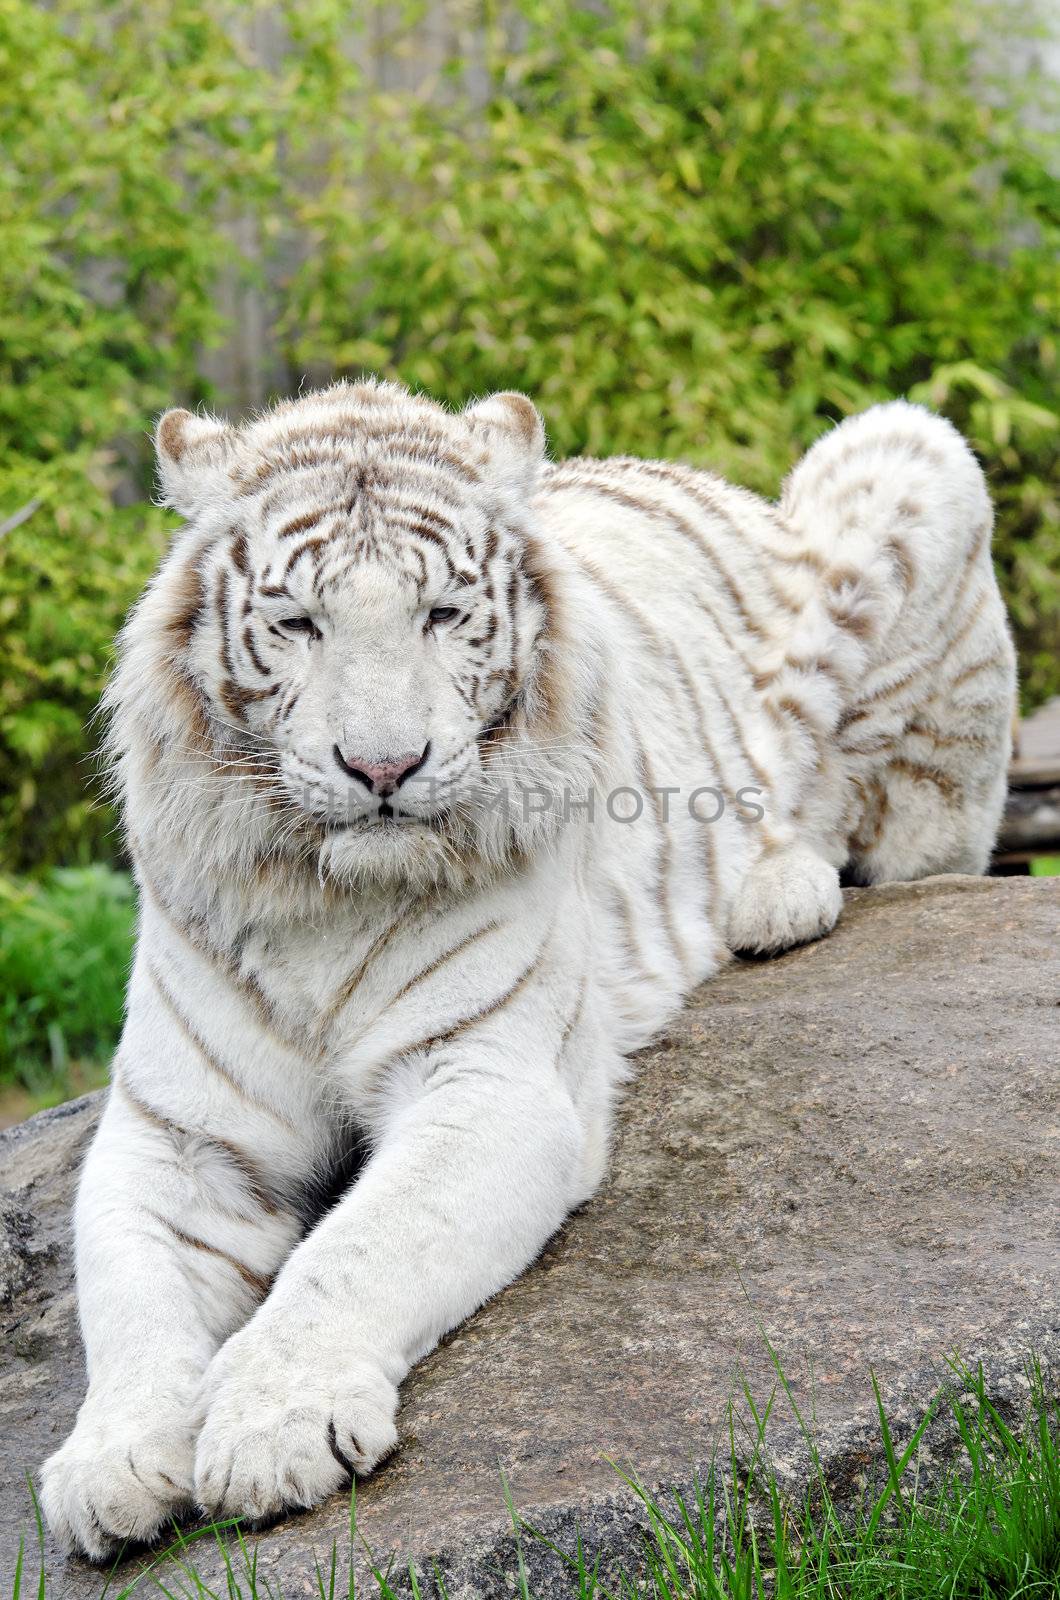 a white tiger in a zoo